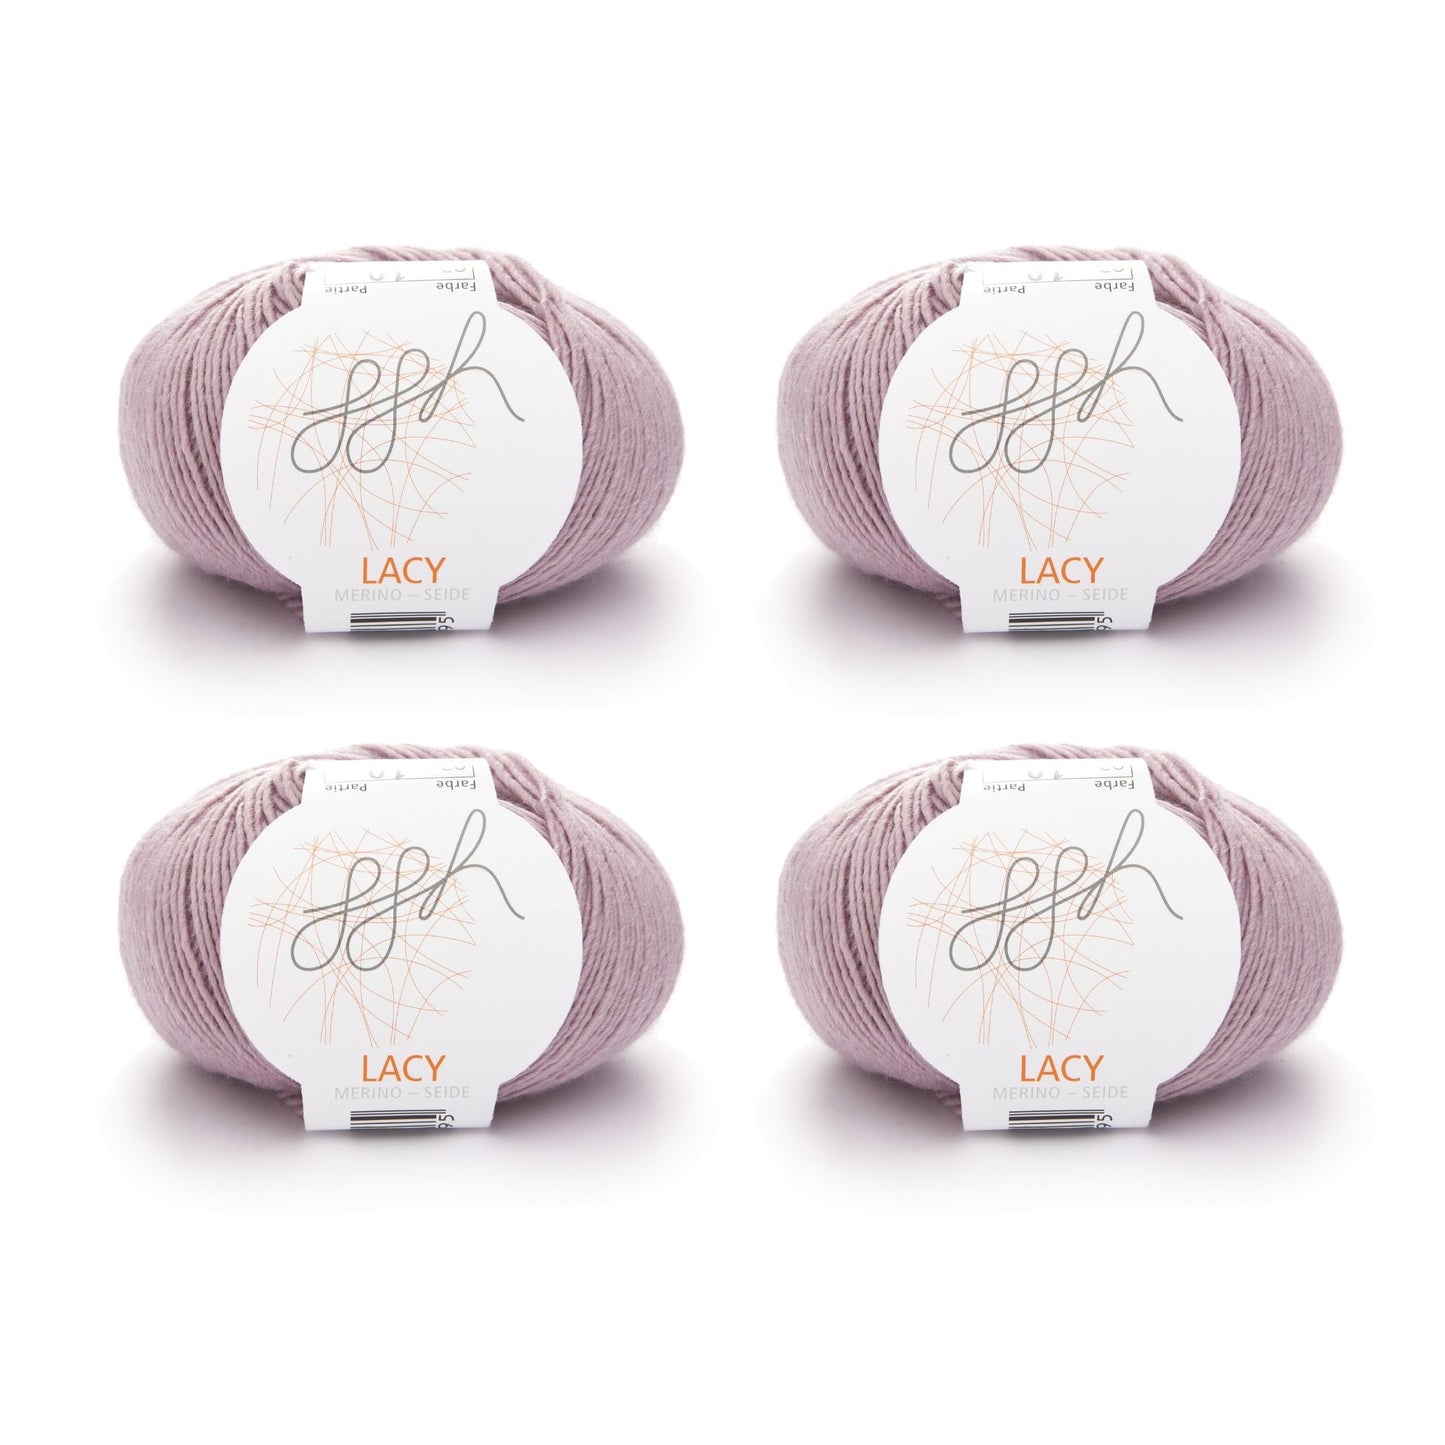 ggh Lacy | Set of 4 x 25g (total 100g) - 002 - Pink